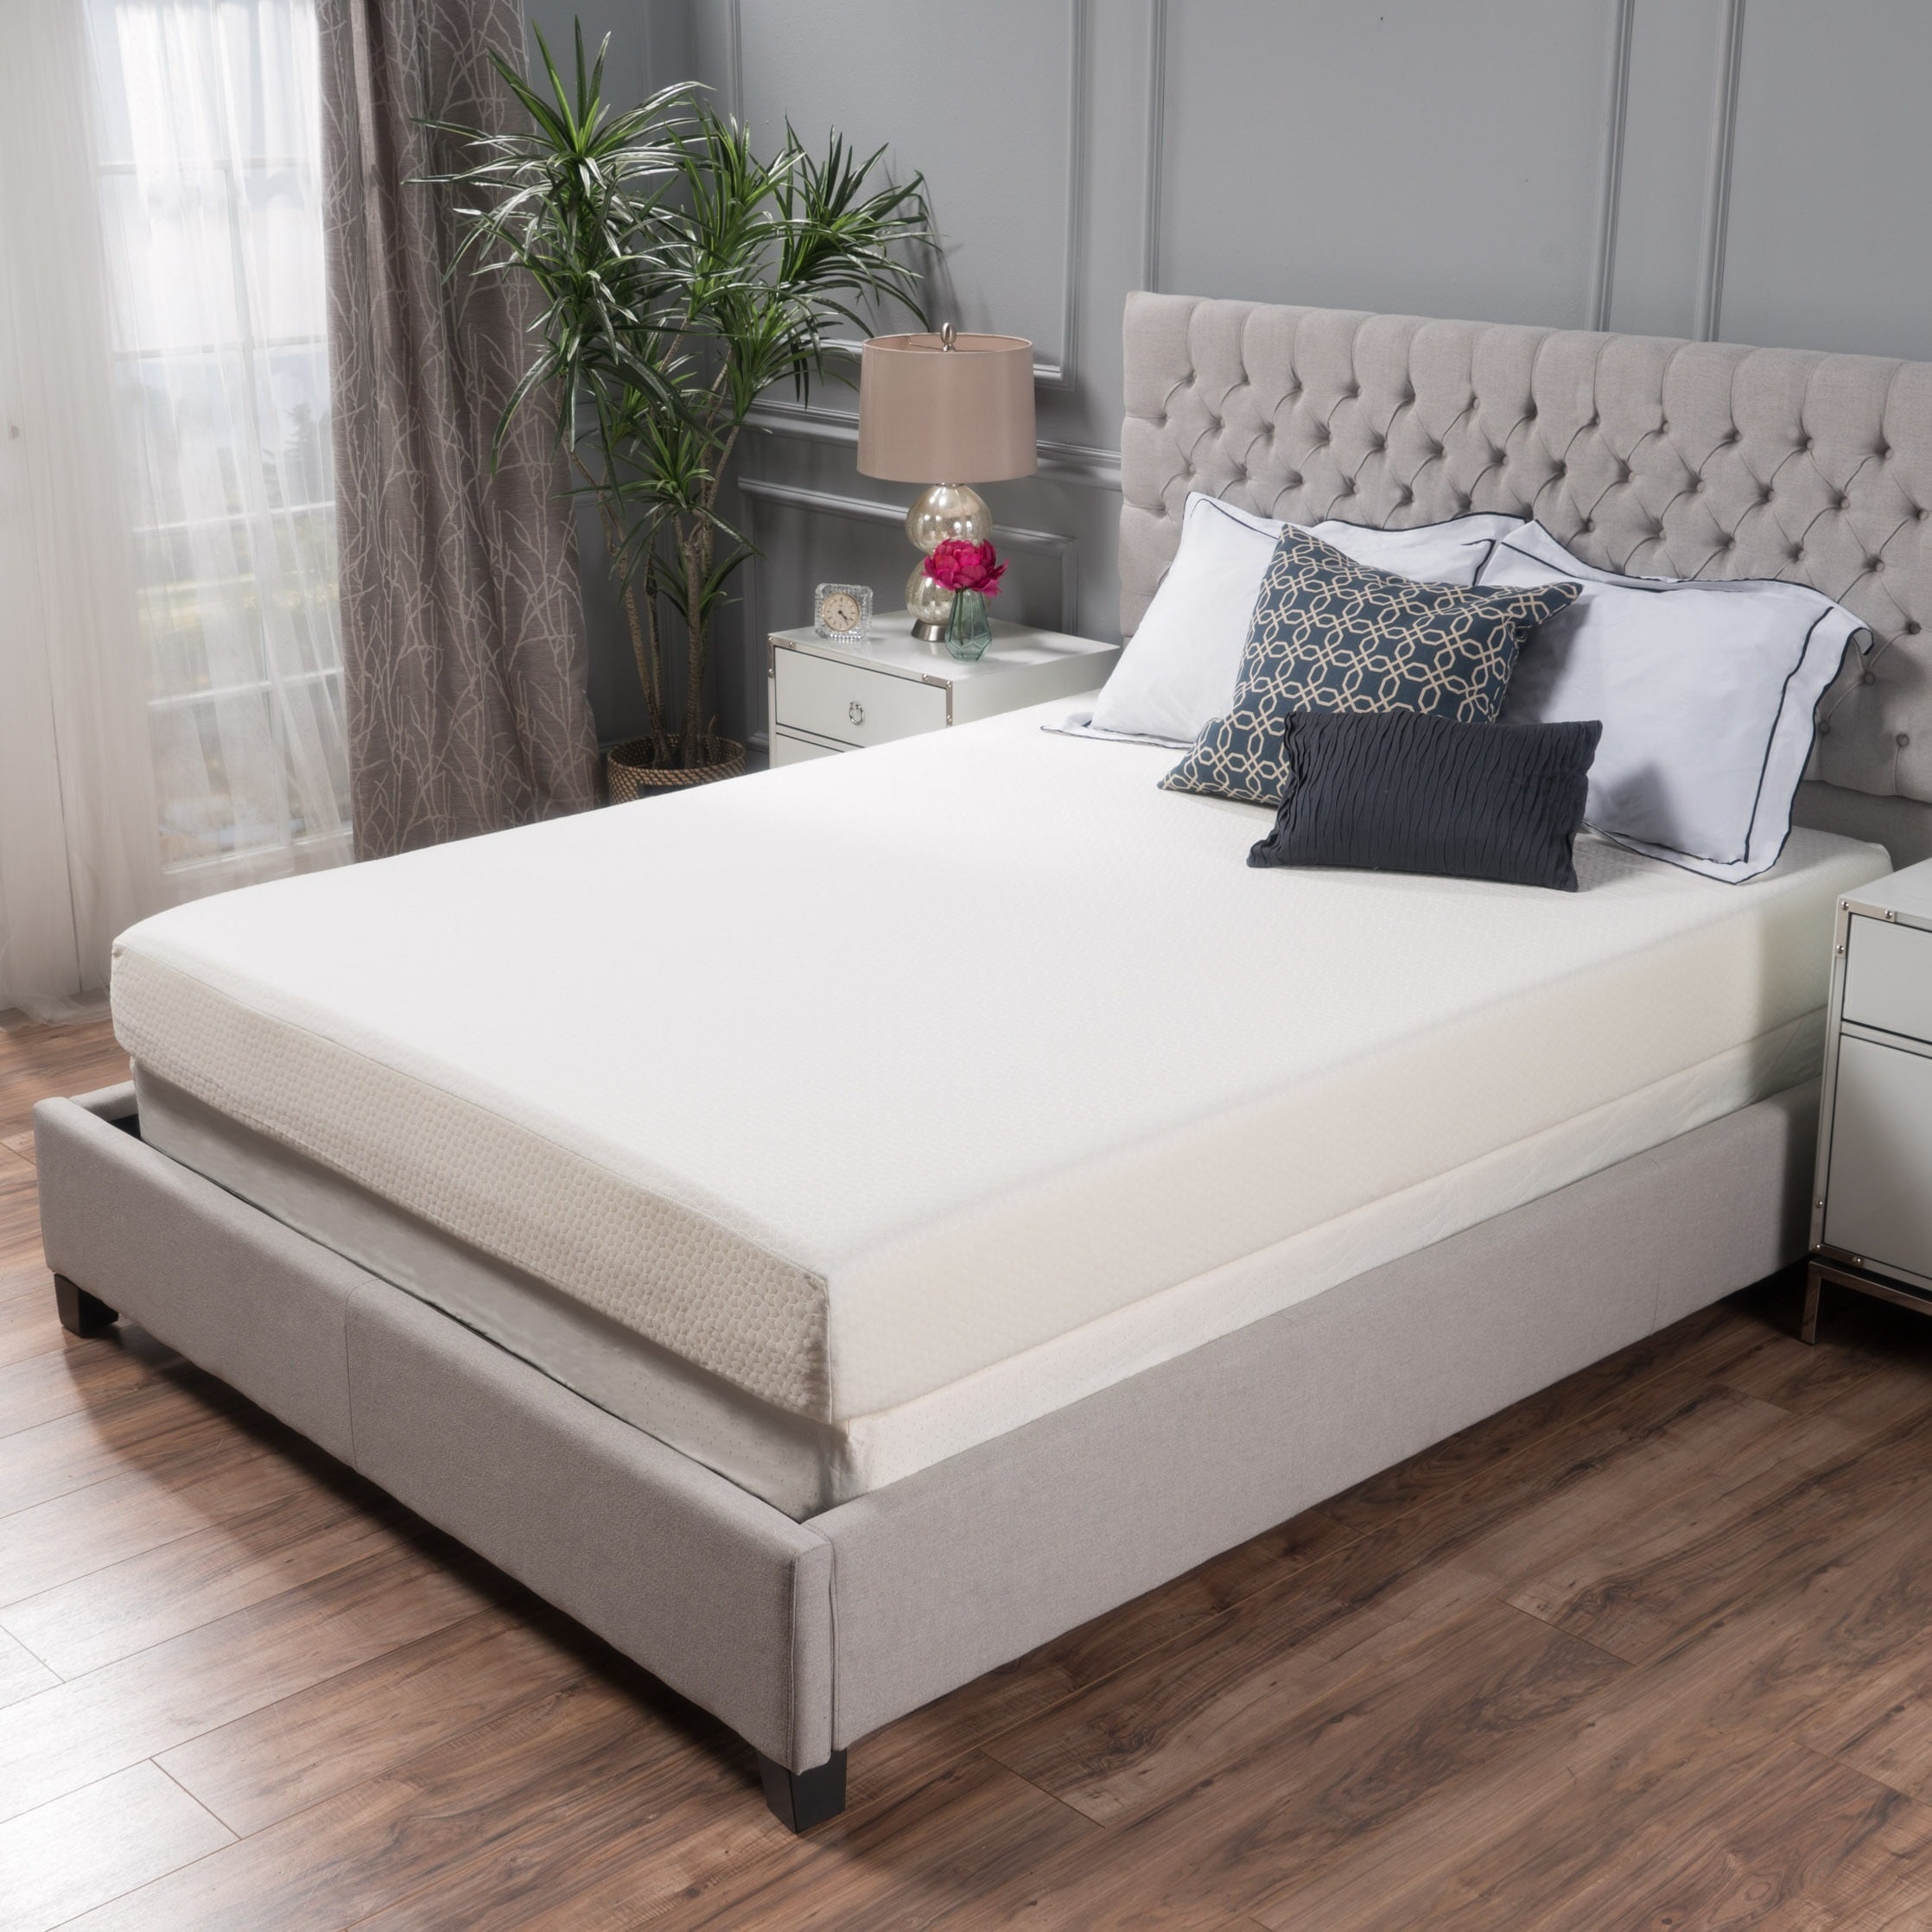 Choice 8 inch Memory Foam Mattress by Christopher Knight Home 